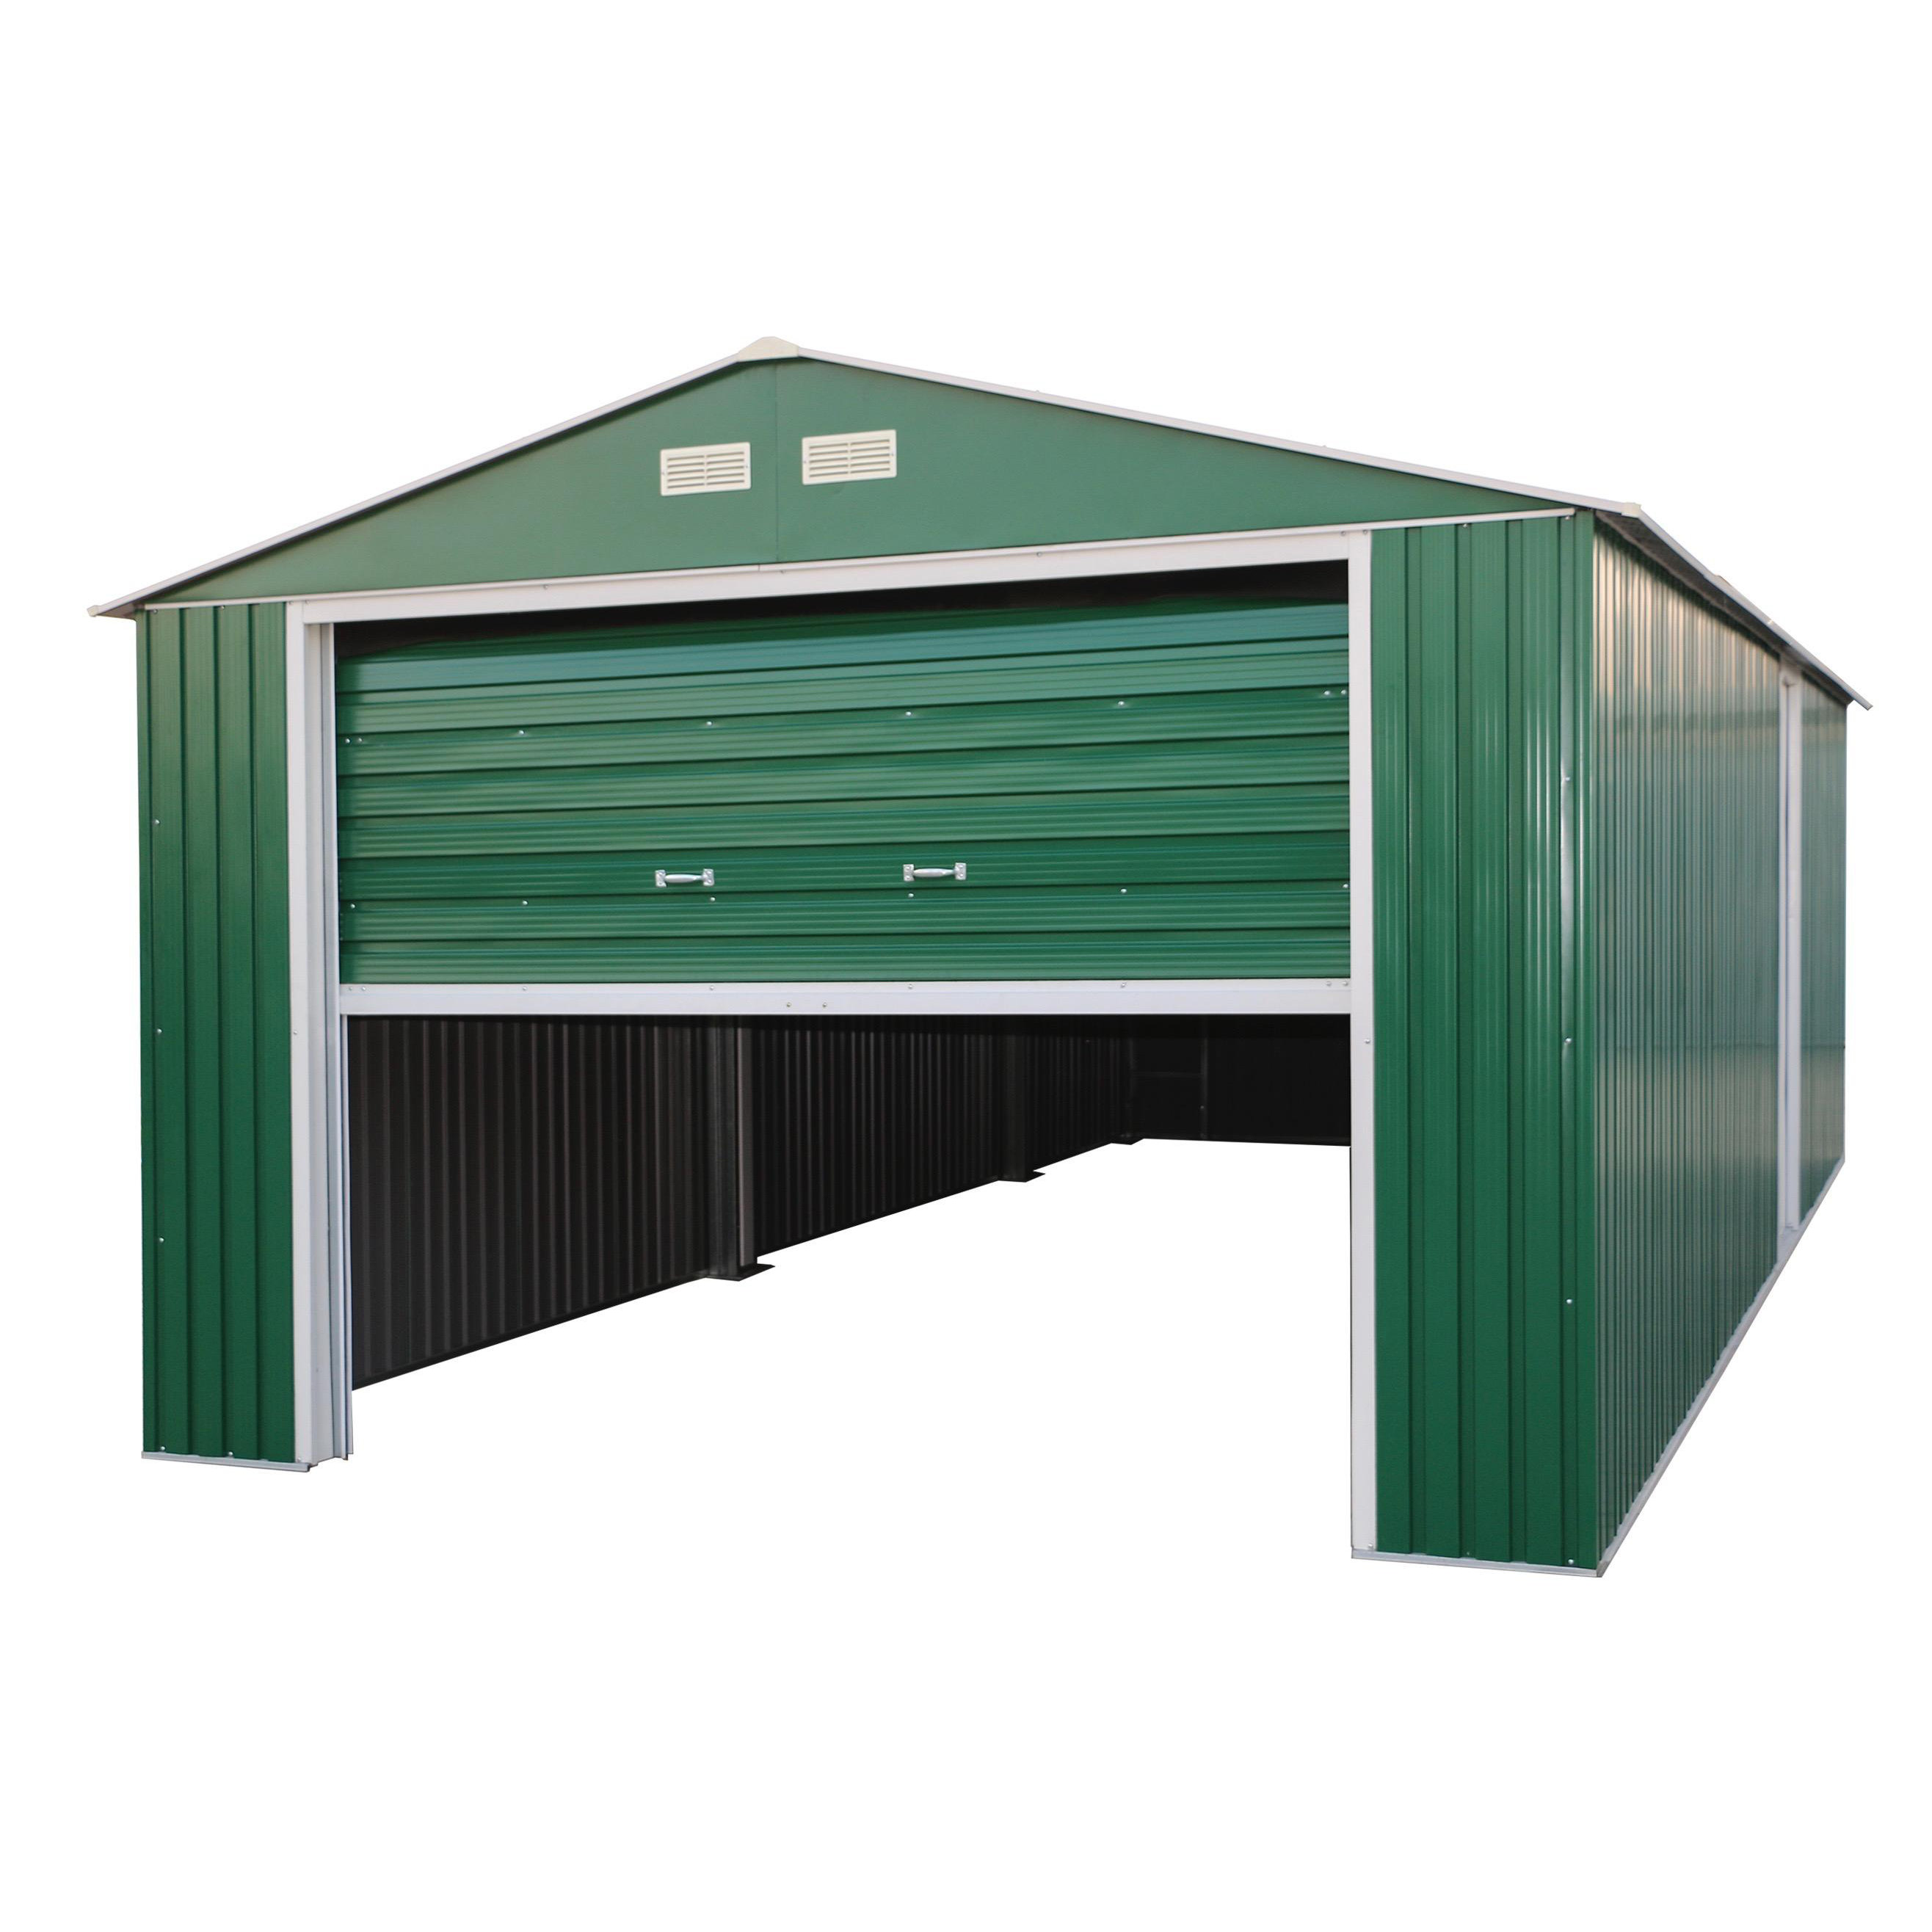 Duramax Imperial 12 Ft. W x 20 Ft. D Metal Garage Shed ...